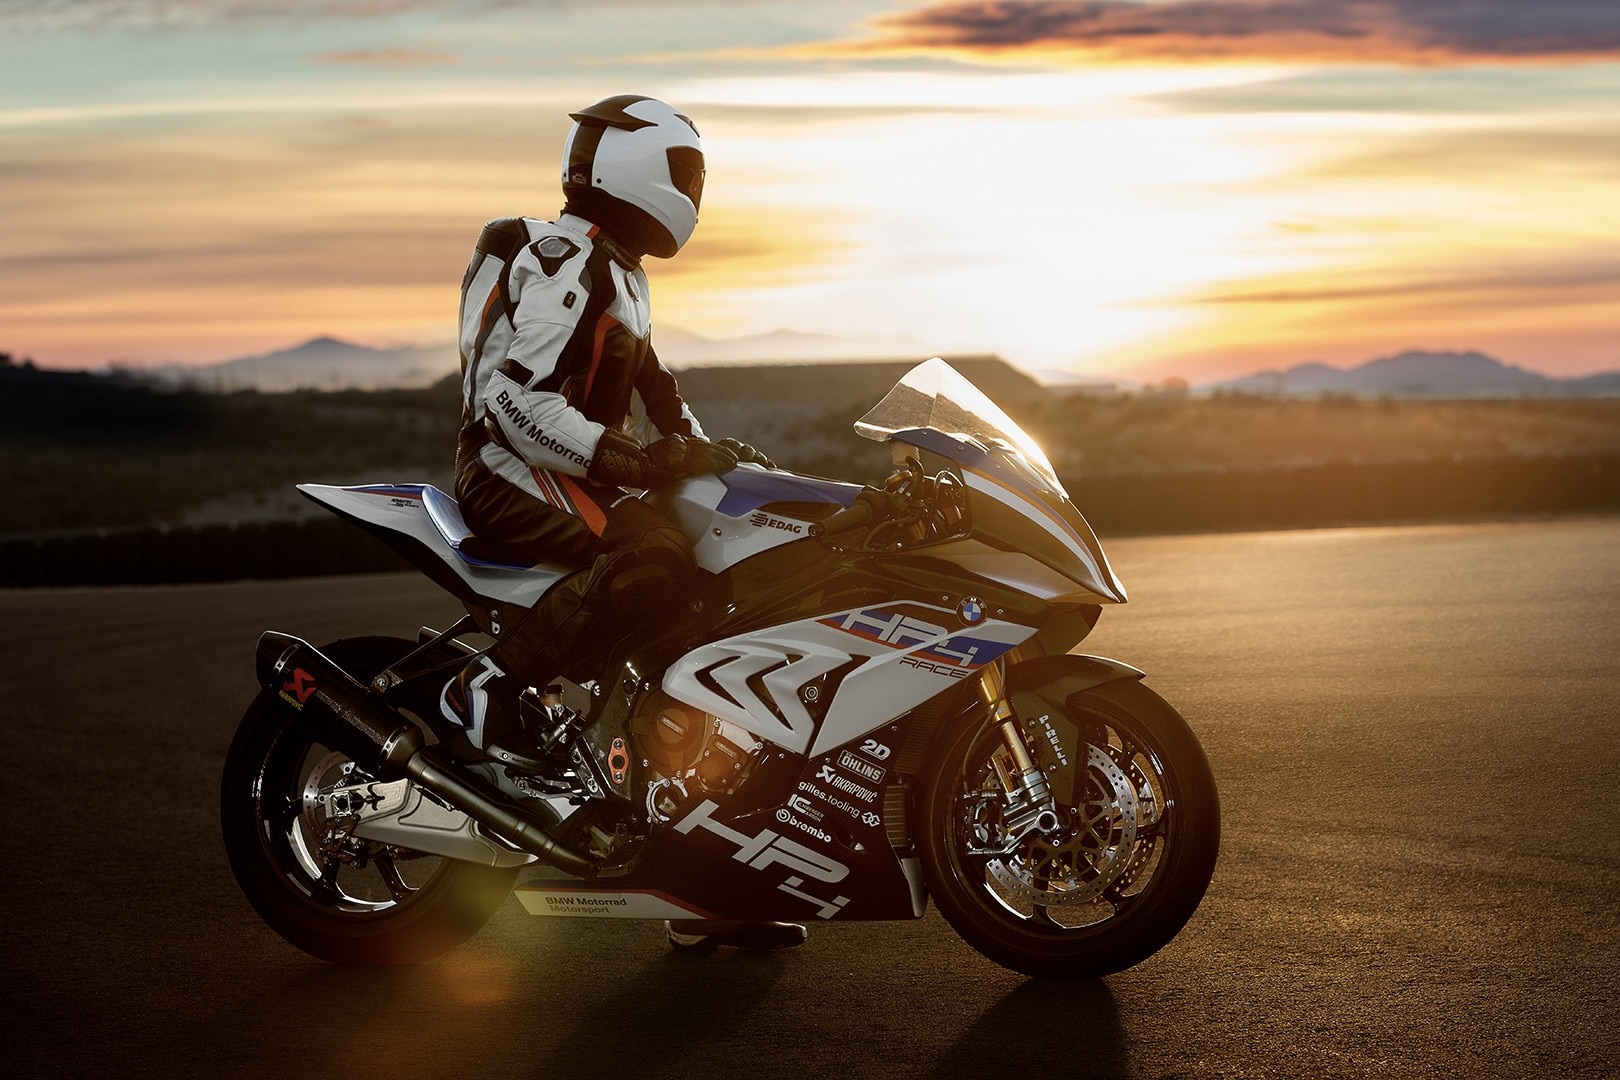 BMW HP4 Race super bike with a rider sitting on the motorcycle looking at a sunset at the track.